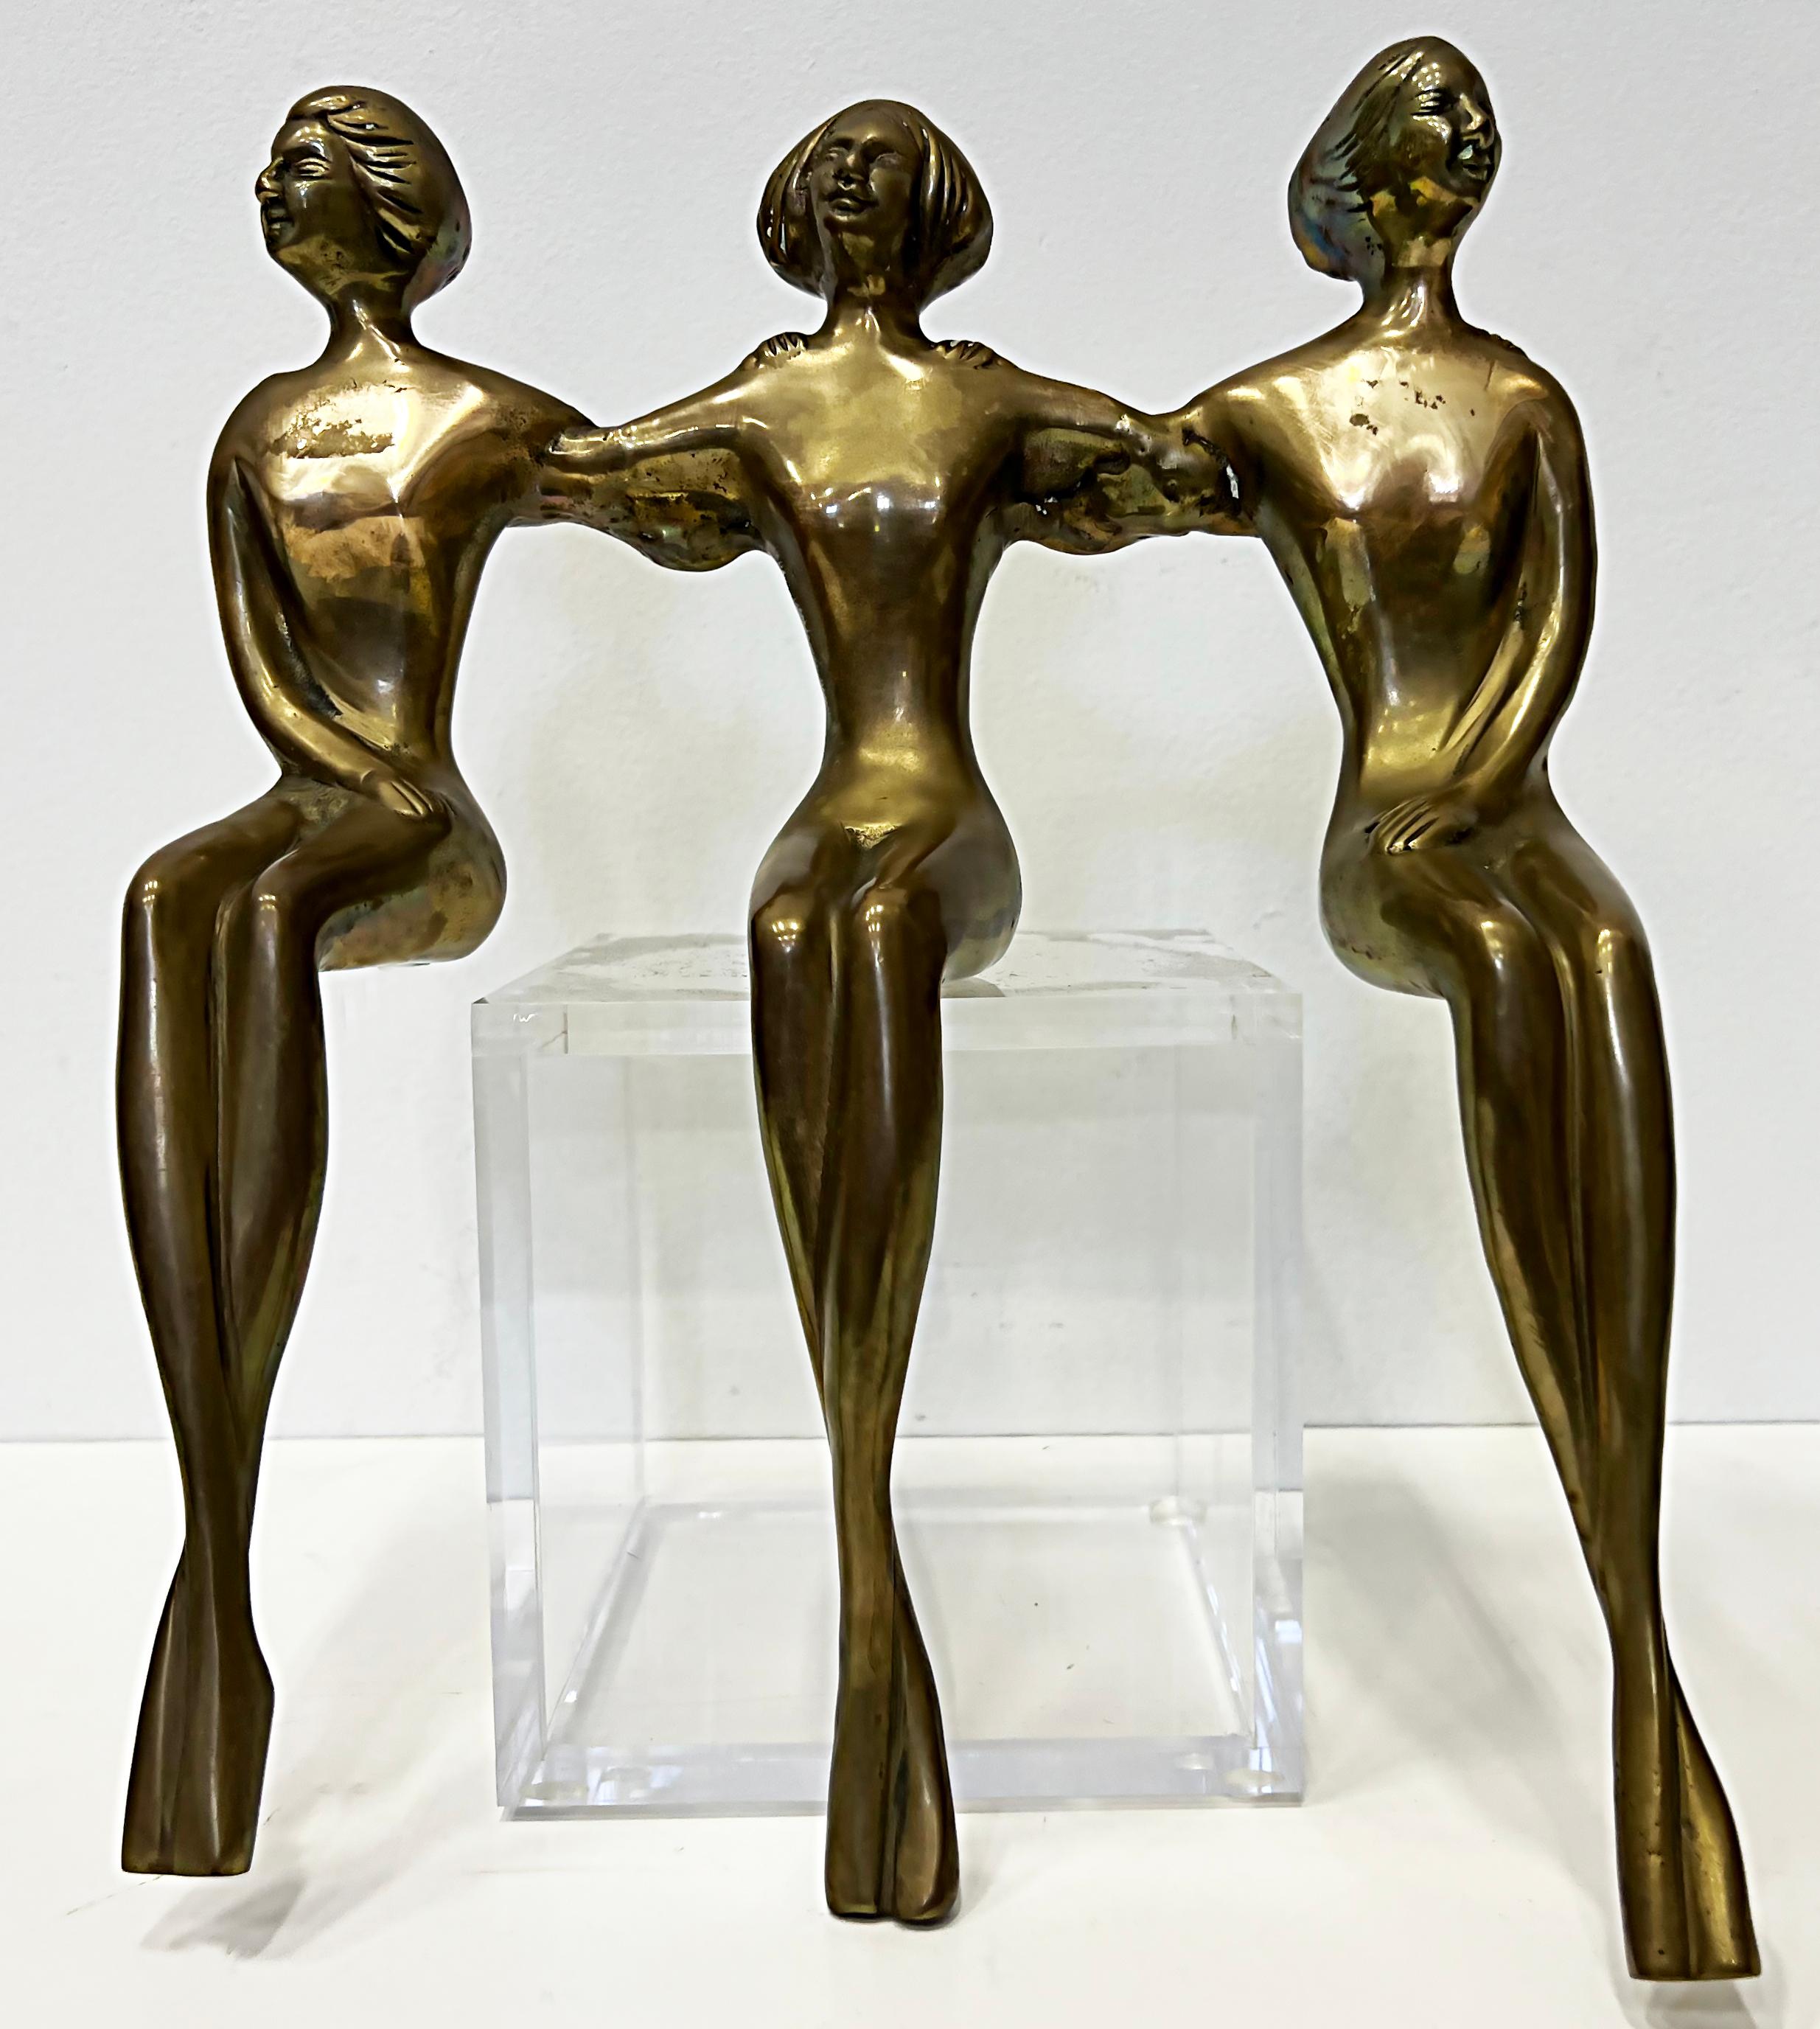 Vintage brass shelf sitter figural sculpture, 3 nude women

Offered for sale is a vintage brass shelf sitter figural sculpture of three women. The three nude figures are all connected with their arms around one another. They can be displayed on